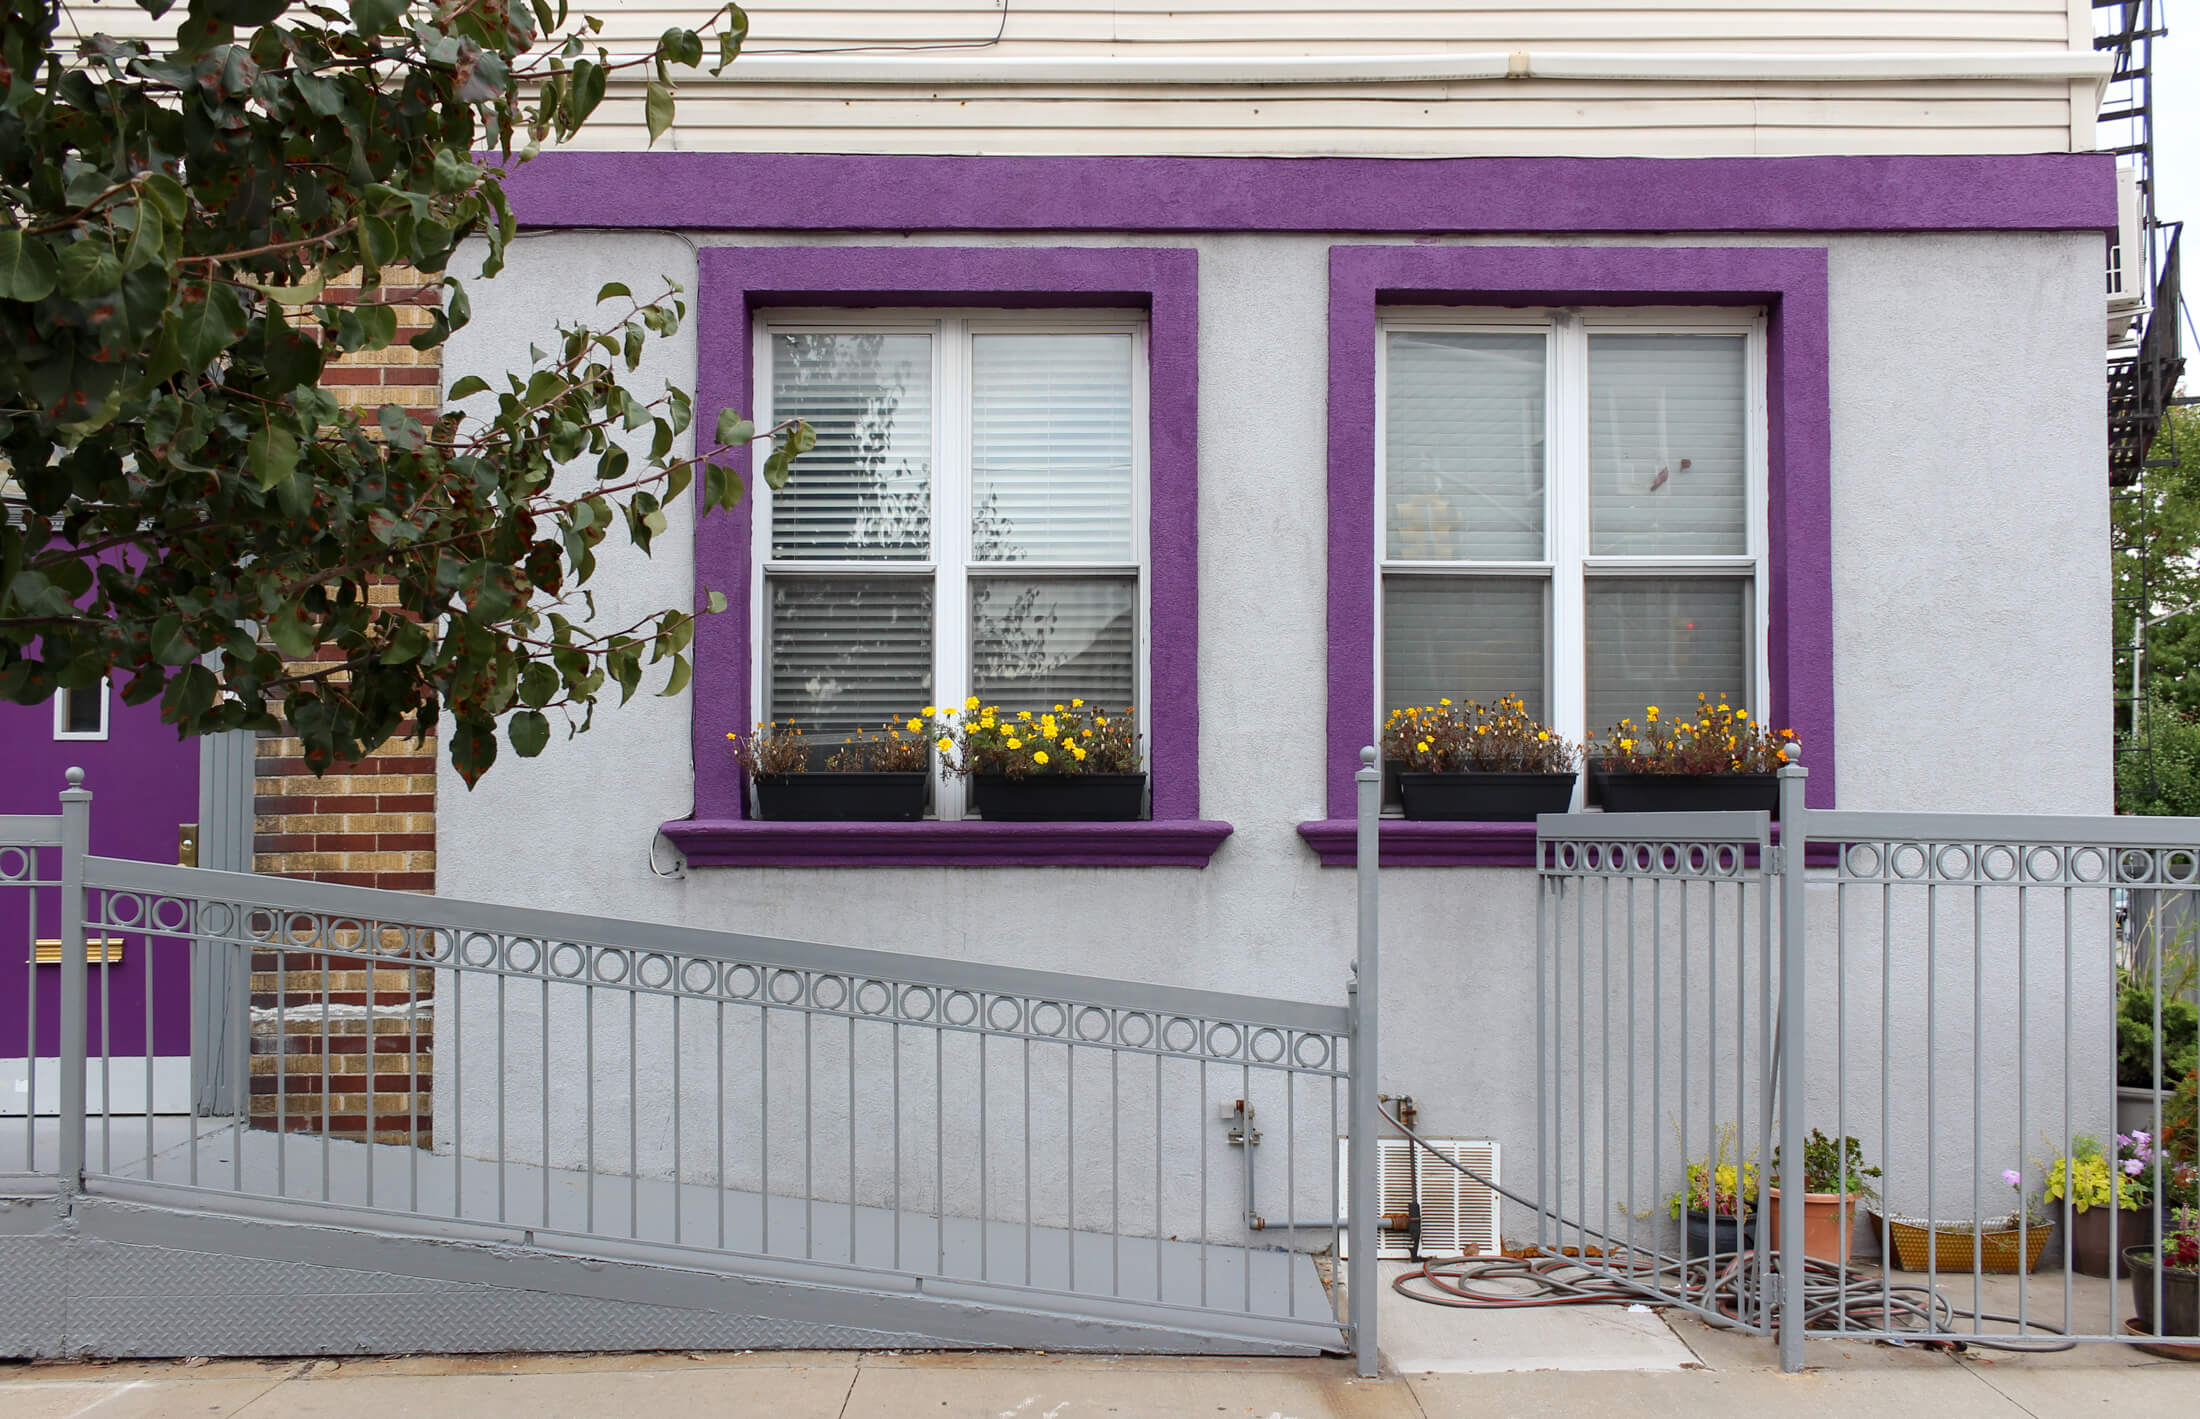 brooklyn - windows with purple trim and window boxes with yellow flowers